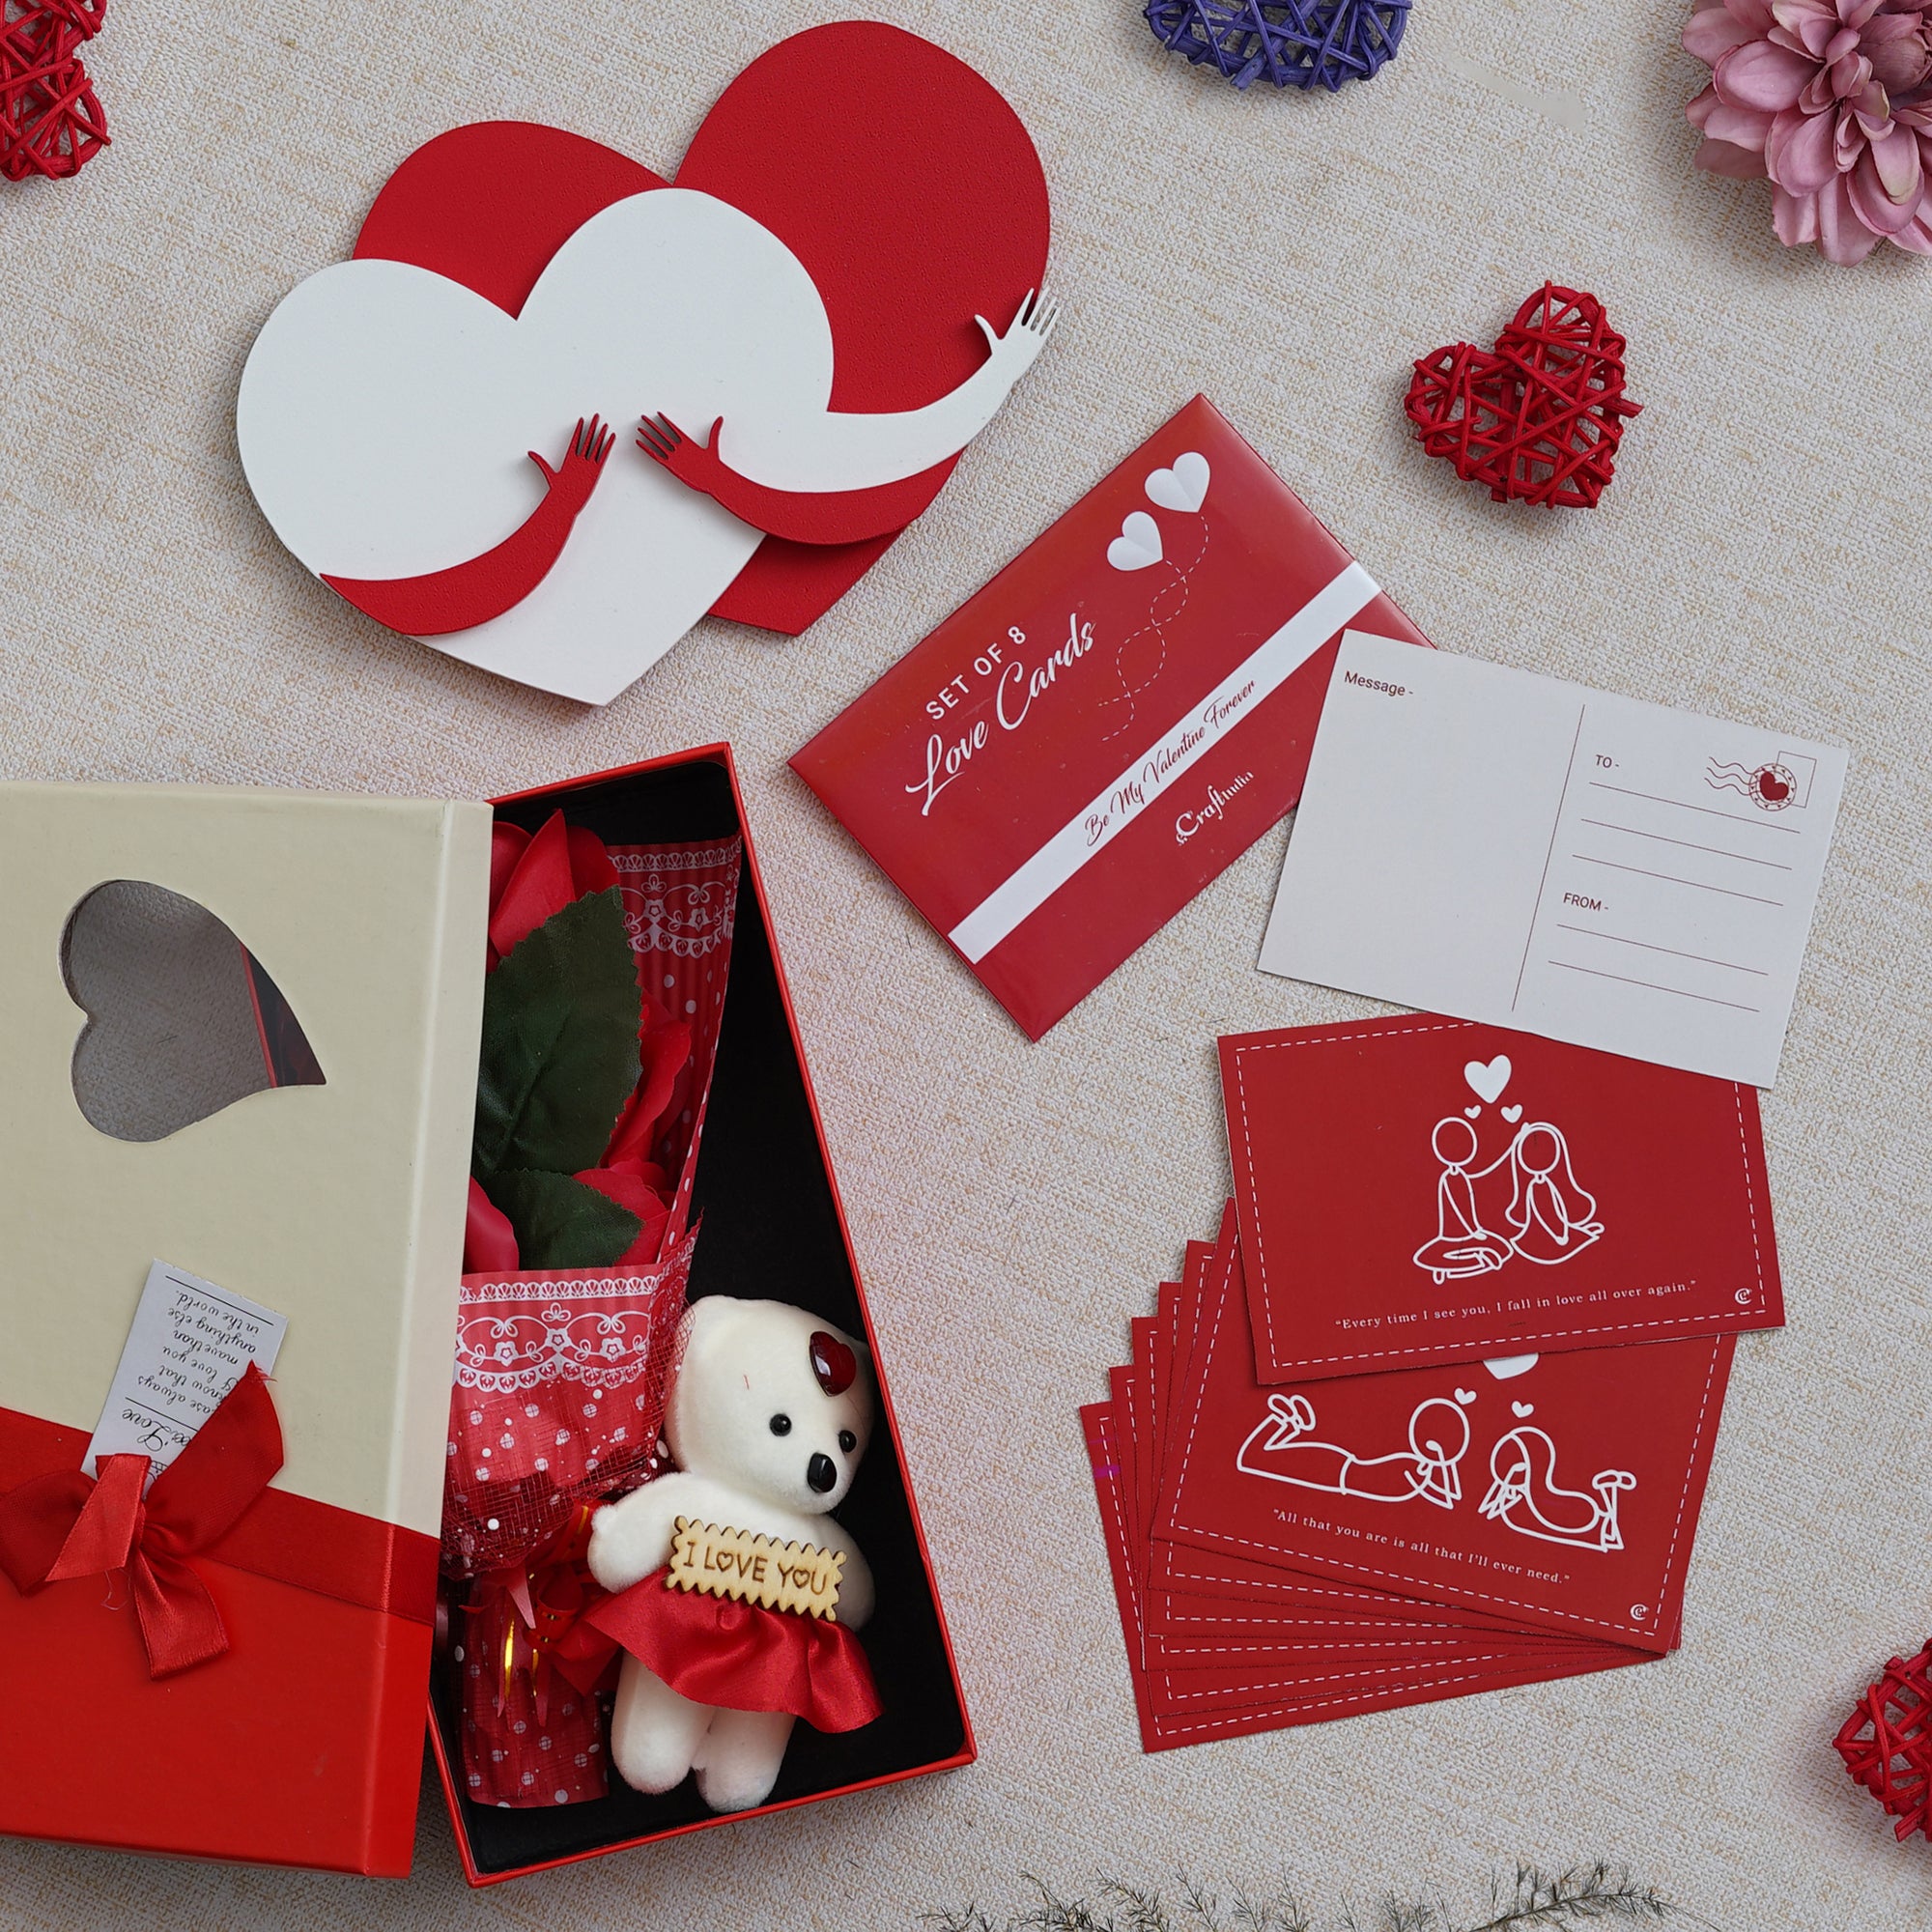 Valentine Combo of Set of 8 Love Post Cards Gift Cards Set, Red and White Heart Hugging Each Other Gift Set, Red Roses Bouquet and White, Red Teddy Bear Valentine's Rectangle Shaped Gift Box